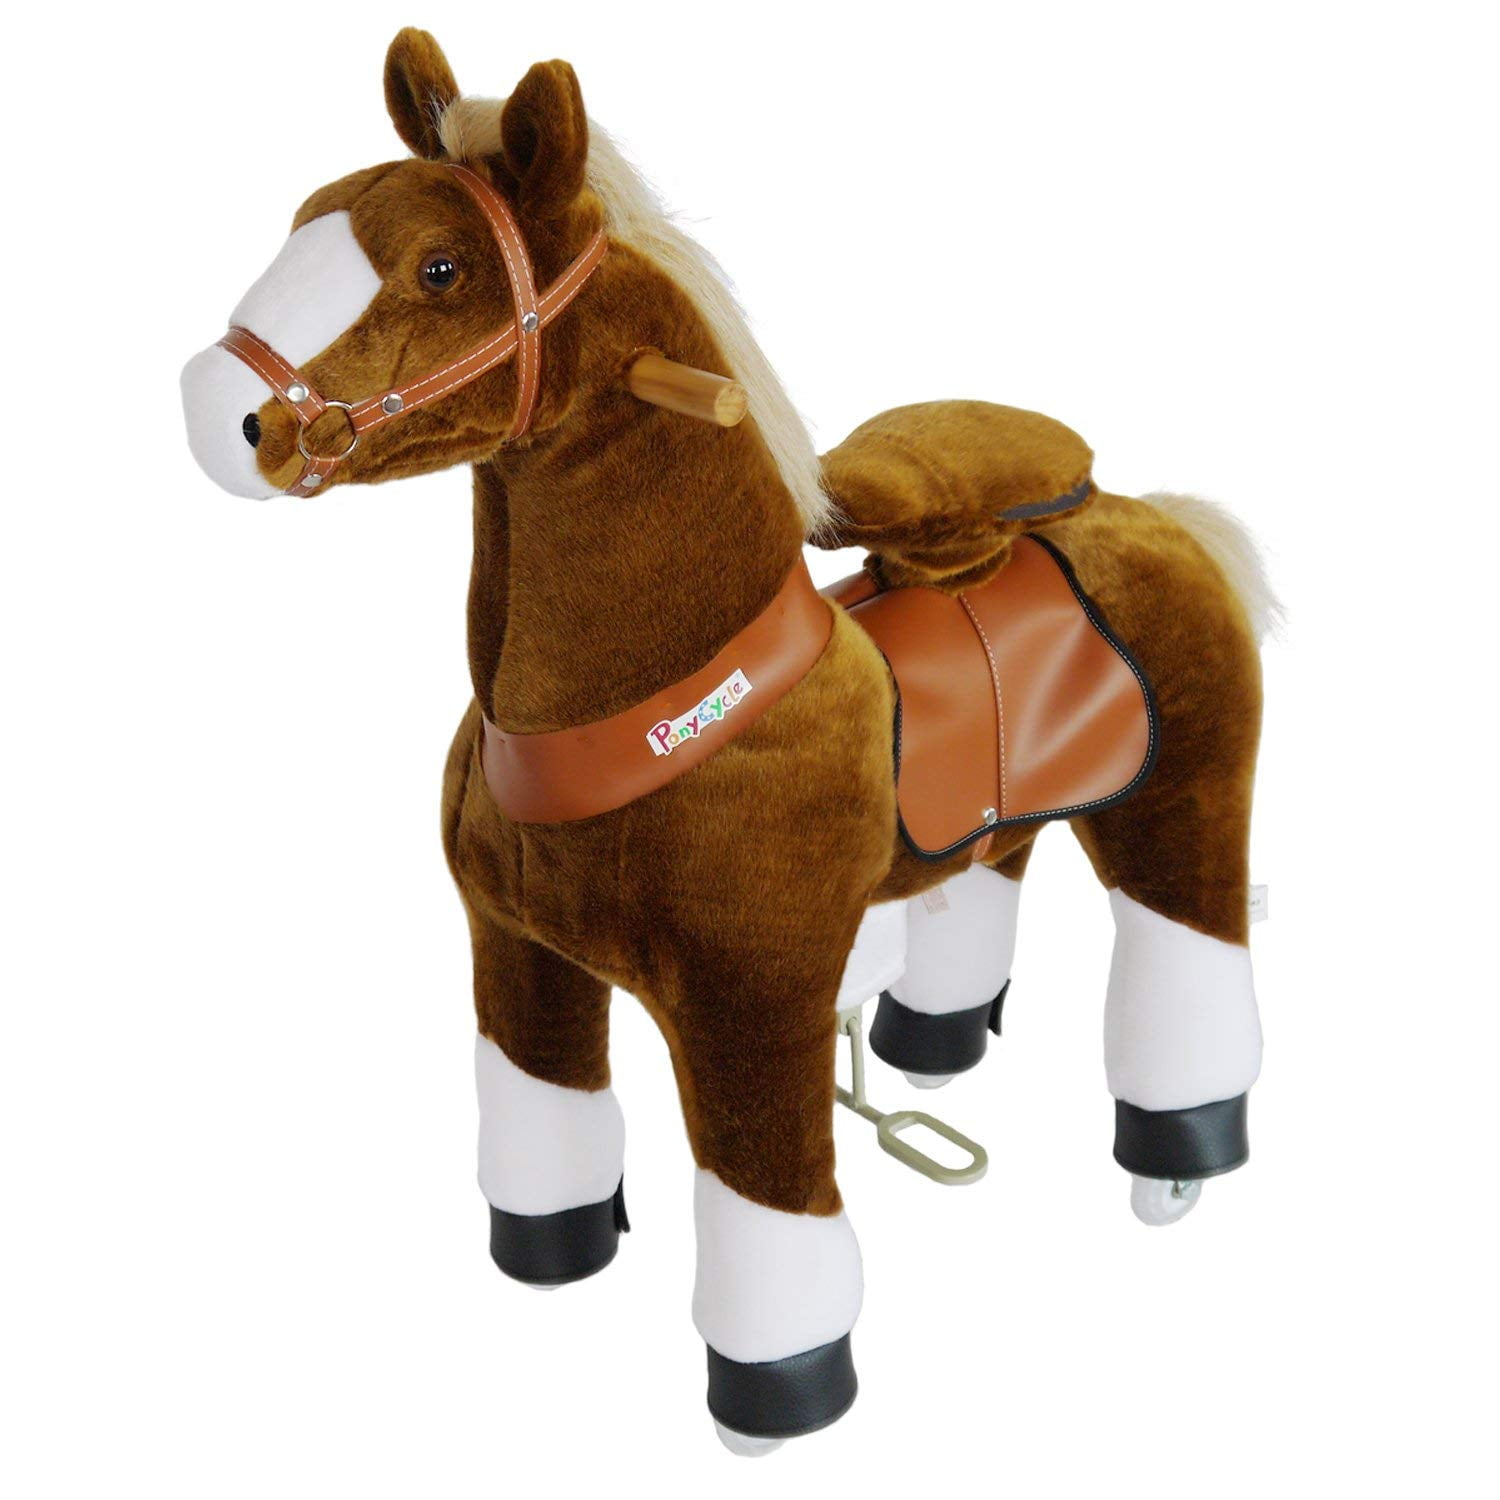 PonyCycle  Kids Manual Ride on Horse Small 3-5 Year Black with White Hoof New 